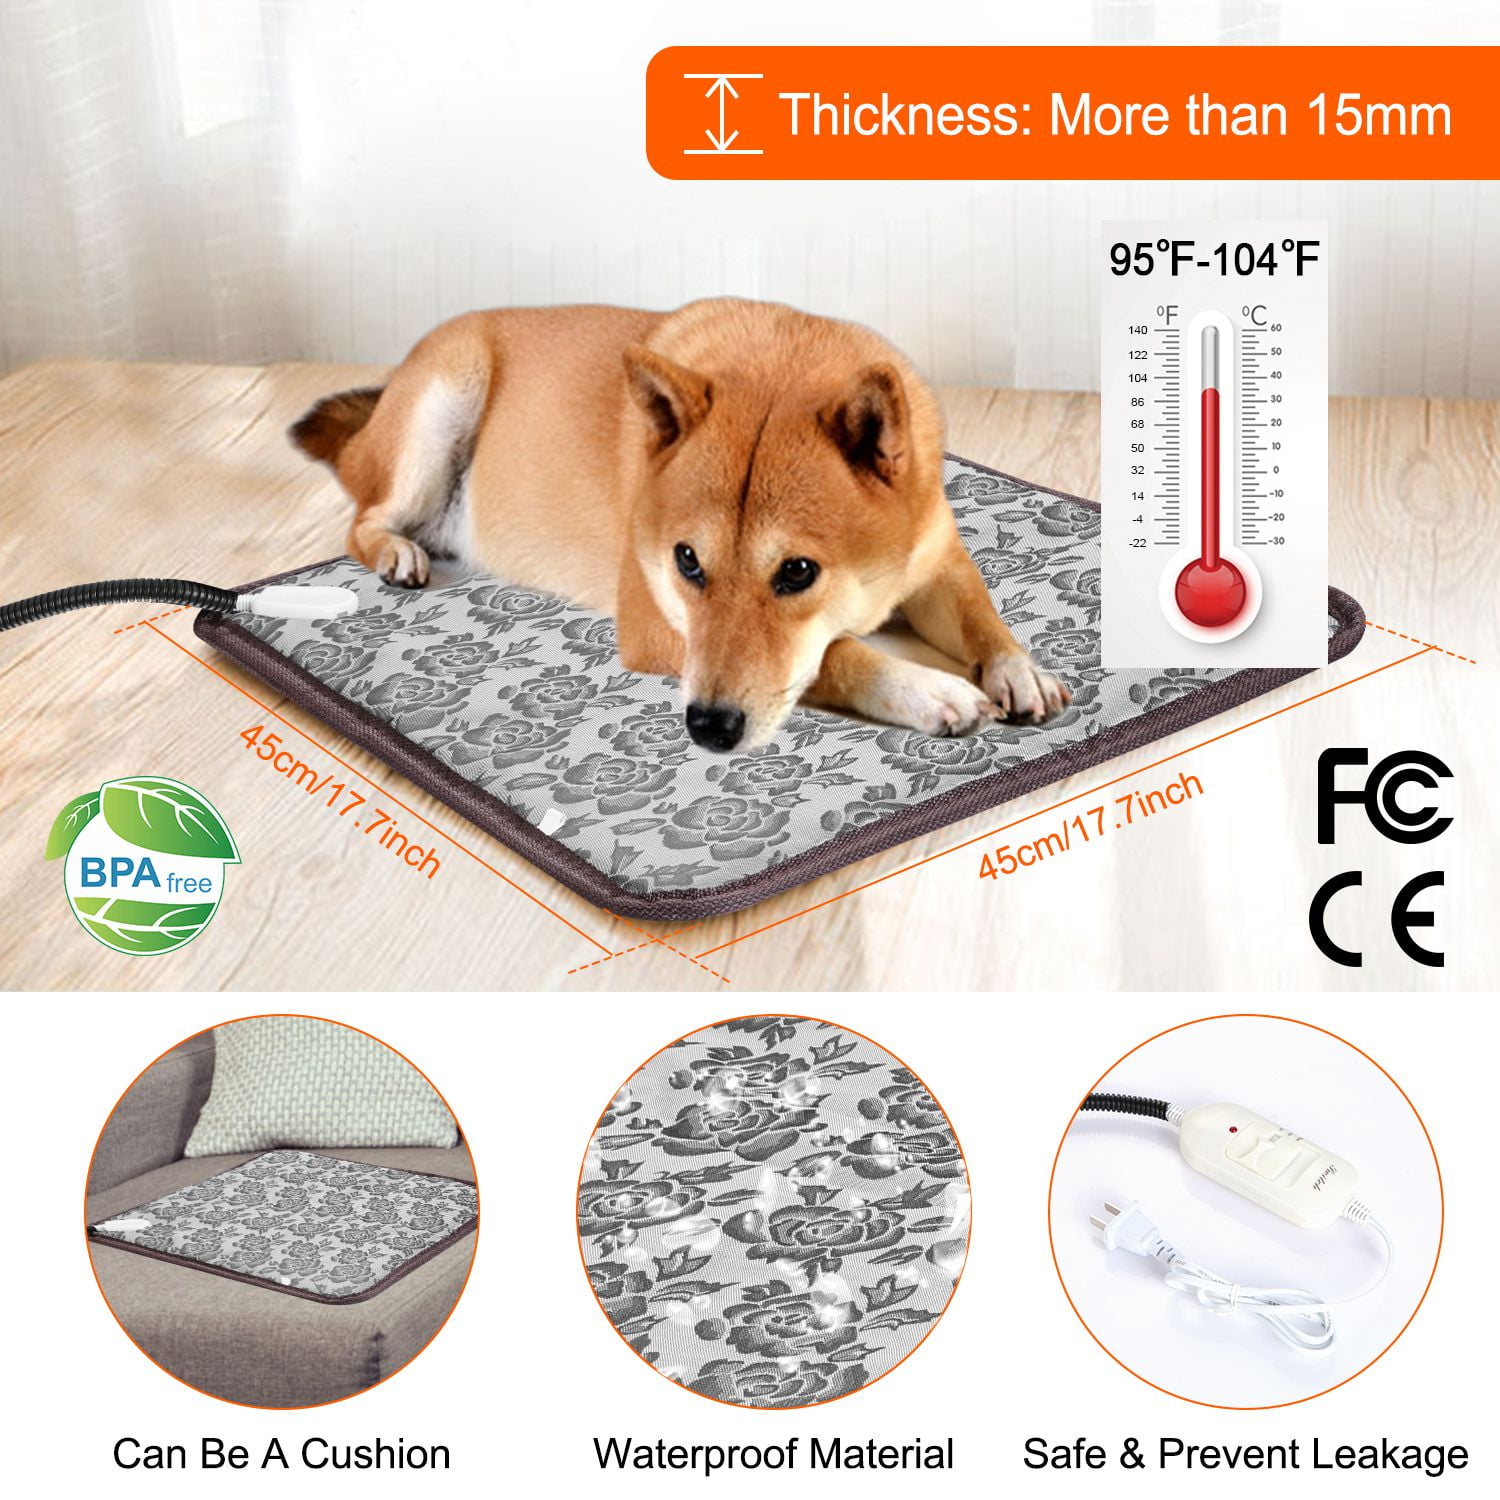 Decdeal Waterproof Electric Pet Heating Pad Bunny Cat PVC Material Reptile Indoor or Outdoor Heating Mat Warming Bed for Dog 4 Type 